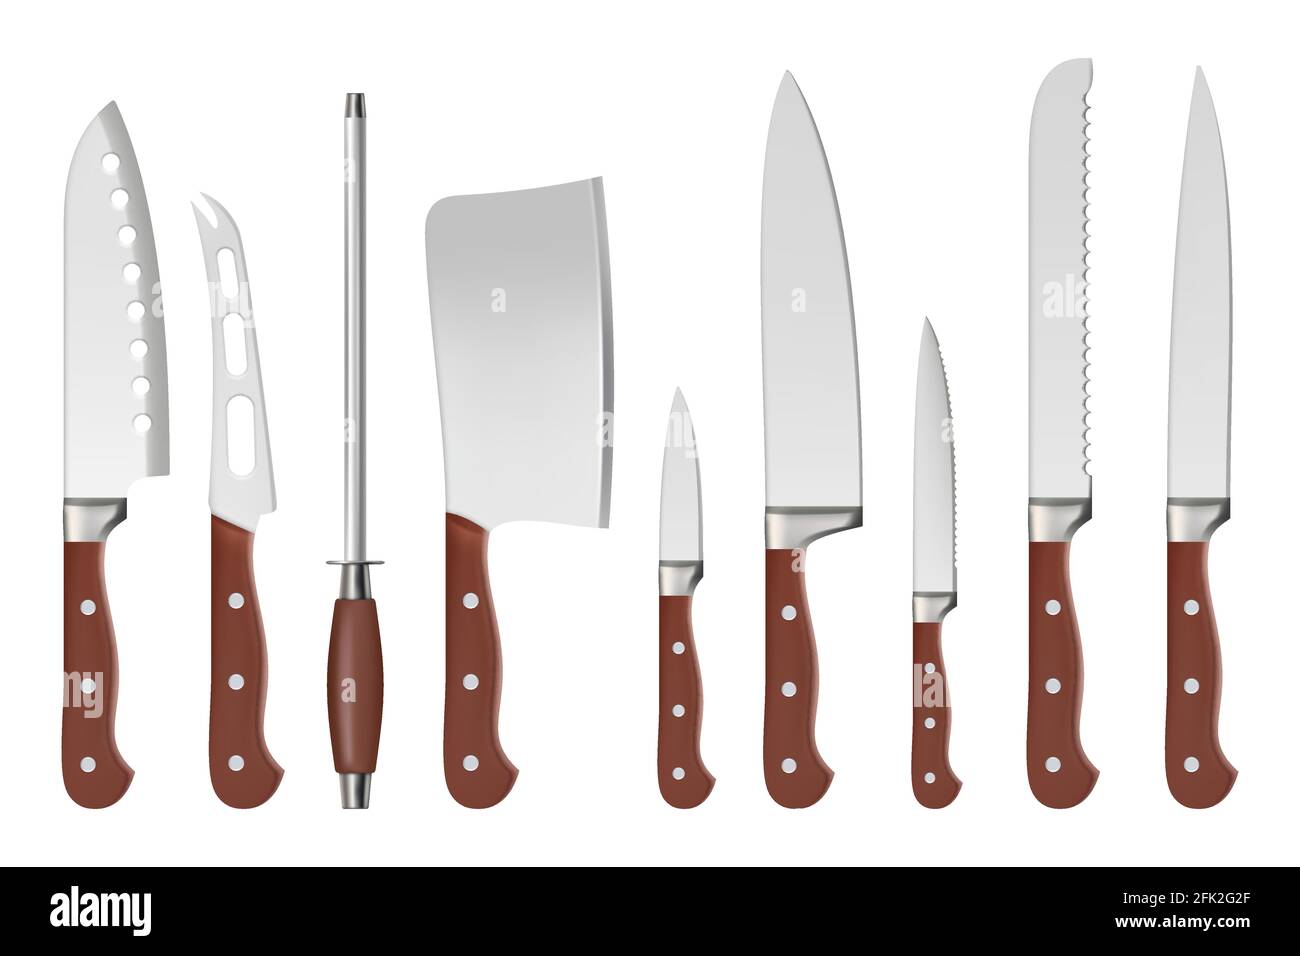 https://c8.alamy.com/comp/2FK2G2F/knives-butcher-professional-sharp-handle-knives-kitchenware-restaurant-accessories-for-cook-vector-closeup-isolated-pictures-2FK2G2F.jpg